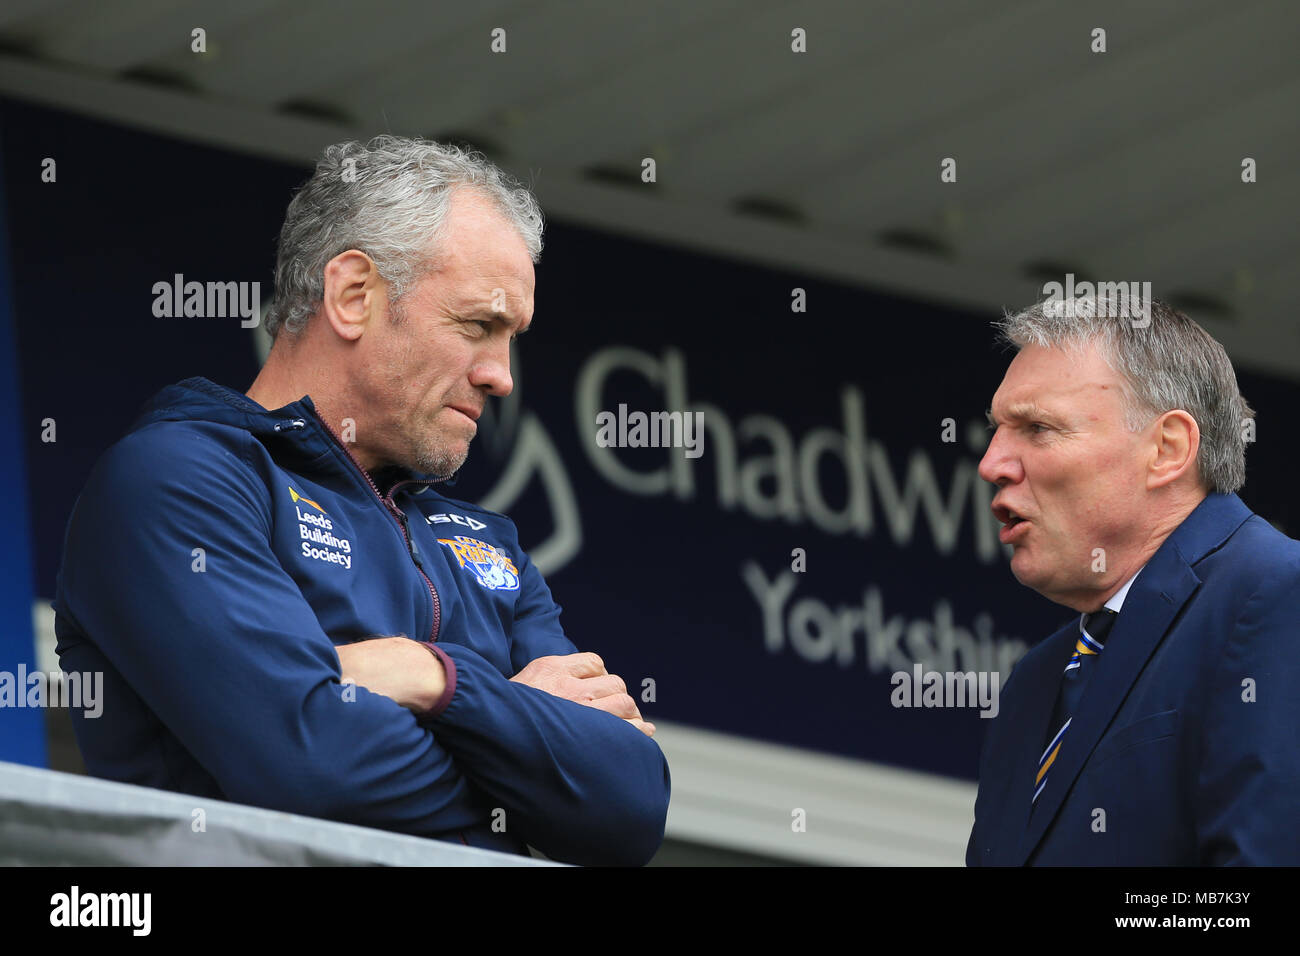 Wakefield, UK. 8th April 2018, Beaumont Legal Stadium, Wakefield, England; Betfred Super League rugby, Wakefield Trinity v Leeds Rhinos; Brian McDermott head coach of Leeds Rhinos talking about the game ahead Credit: News Images/Alamy Live News Credit: News Images/Alamy Live News Stock Photo